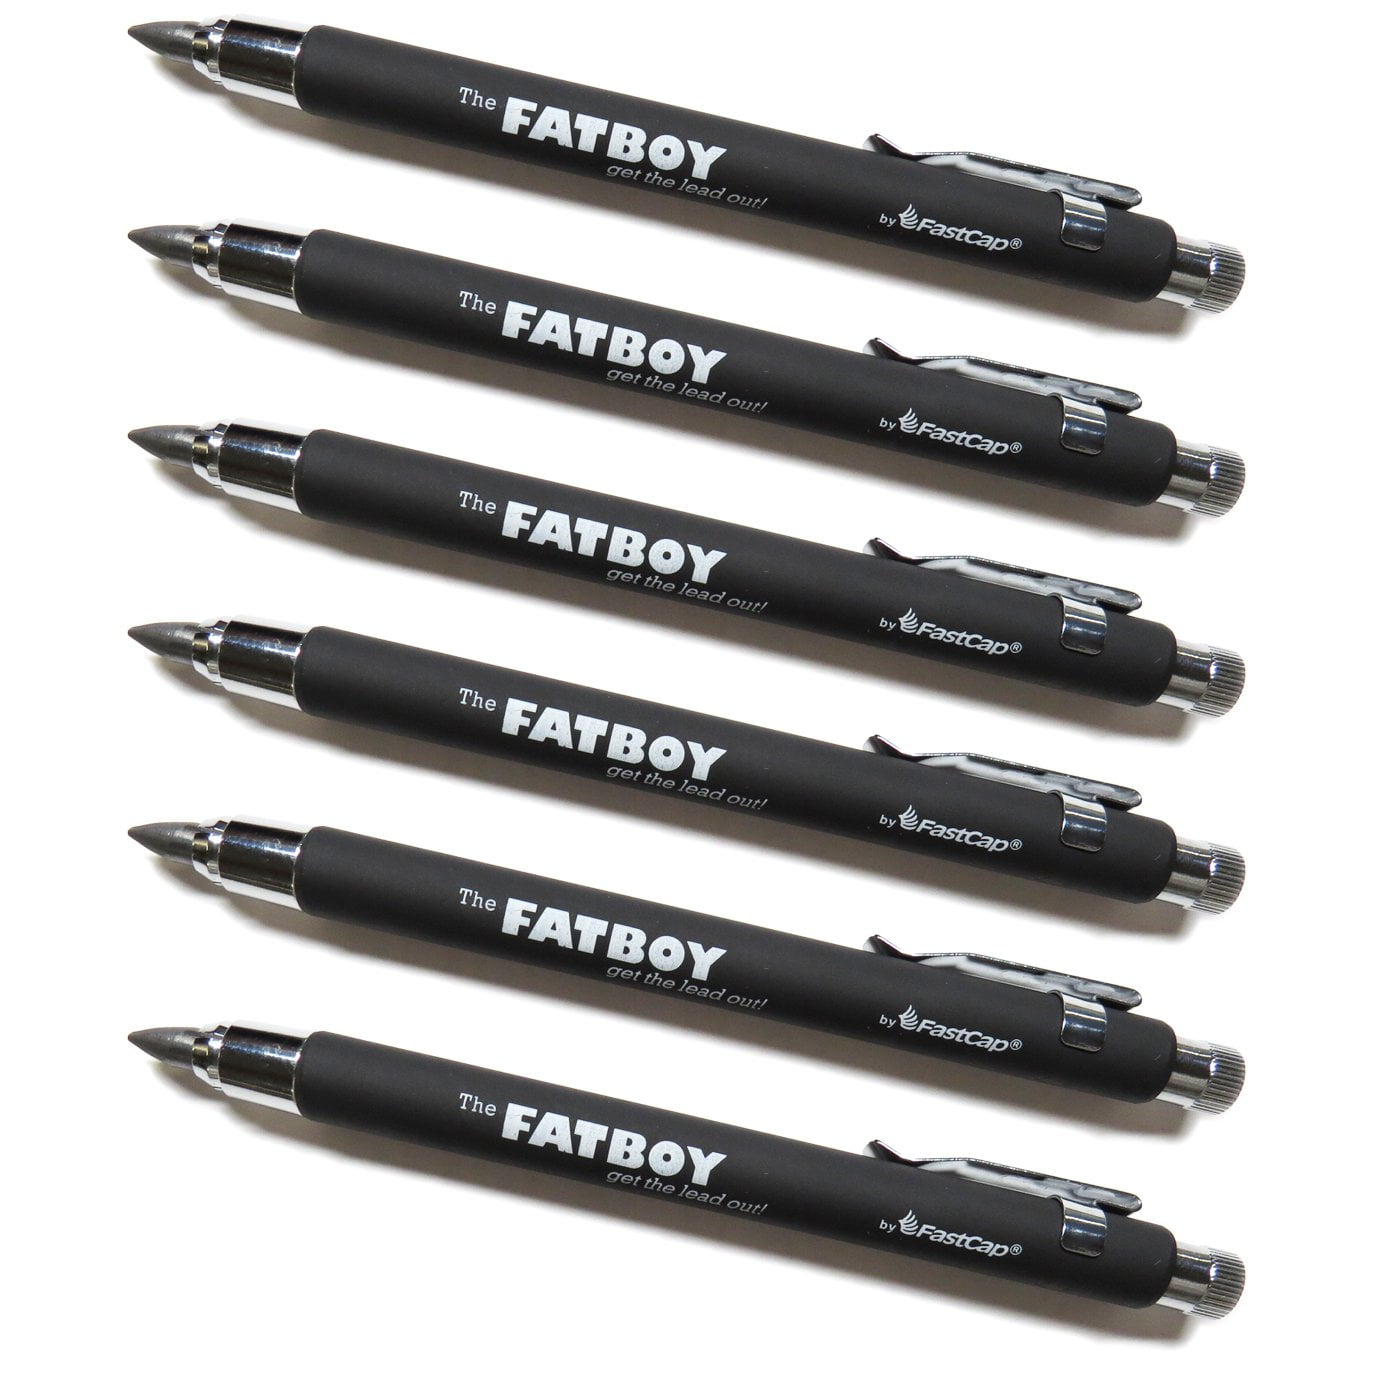 Fatboy Pencil Refill Icludes 5 Black Lds & 3 Erasers Comfortable Light Weight US 